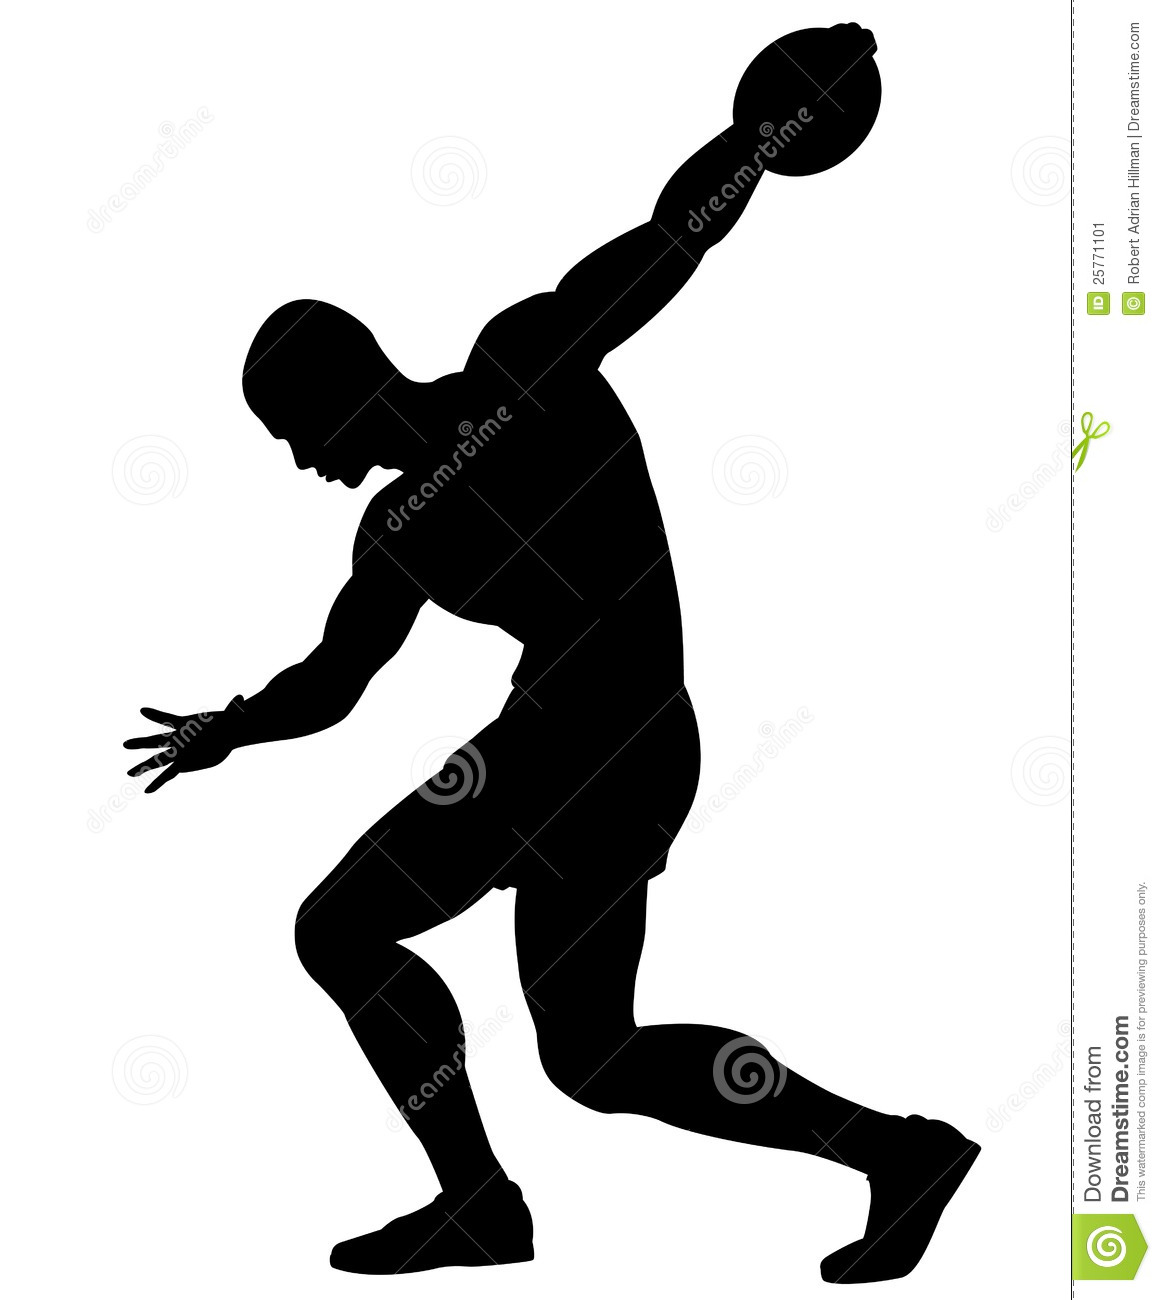 Discus Thrower Stock Image   Image  25771101